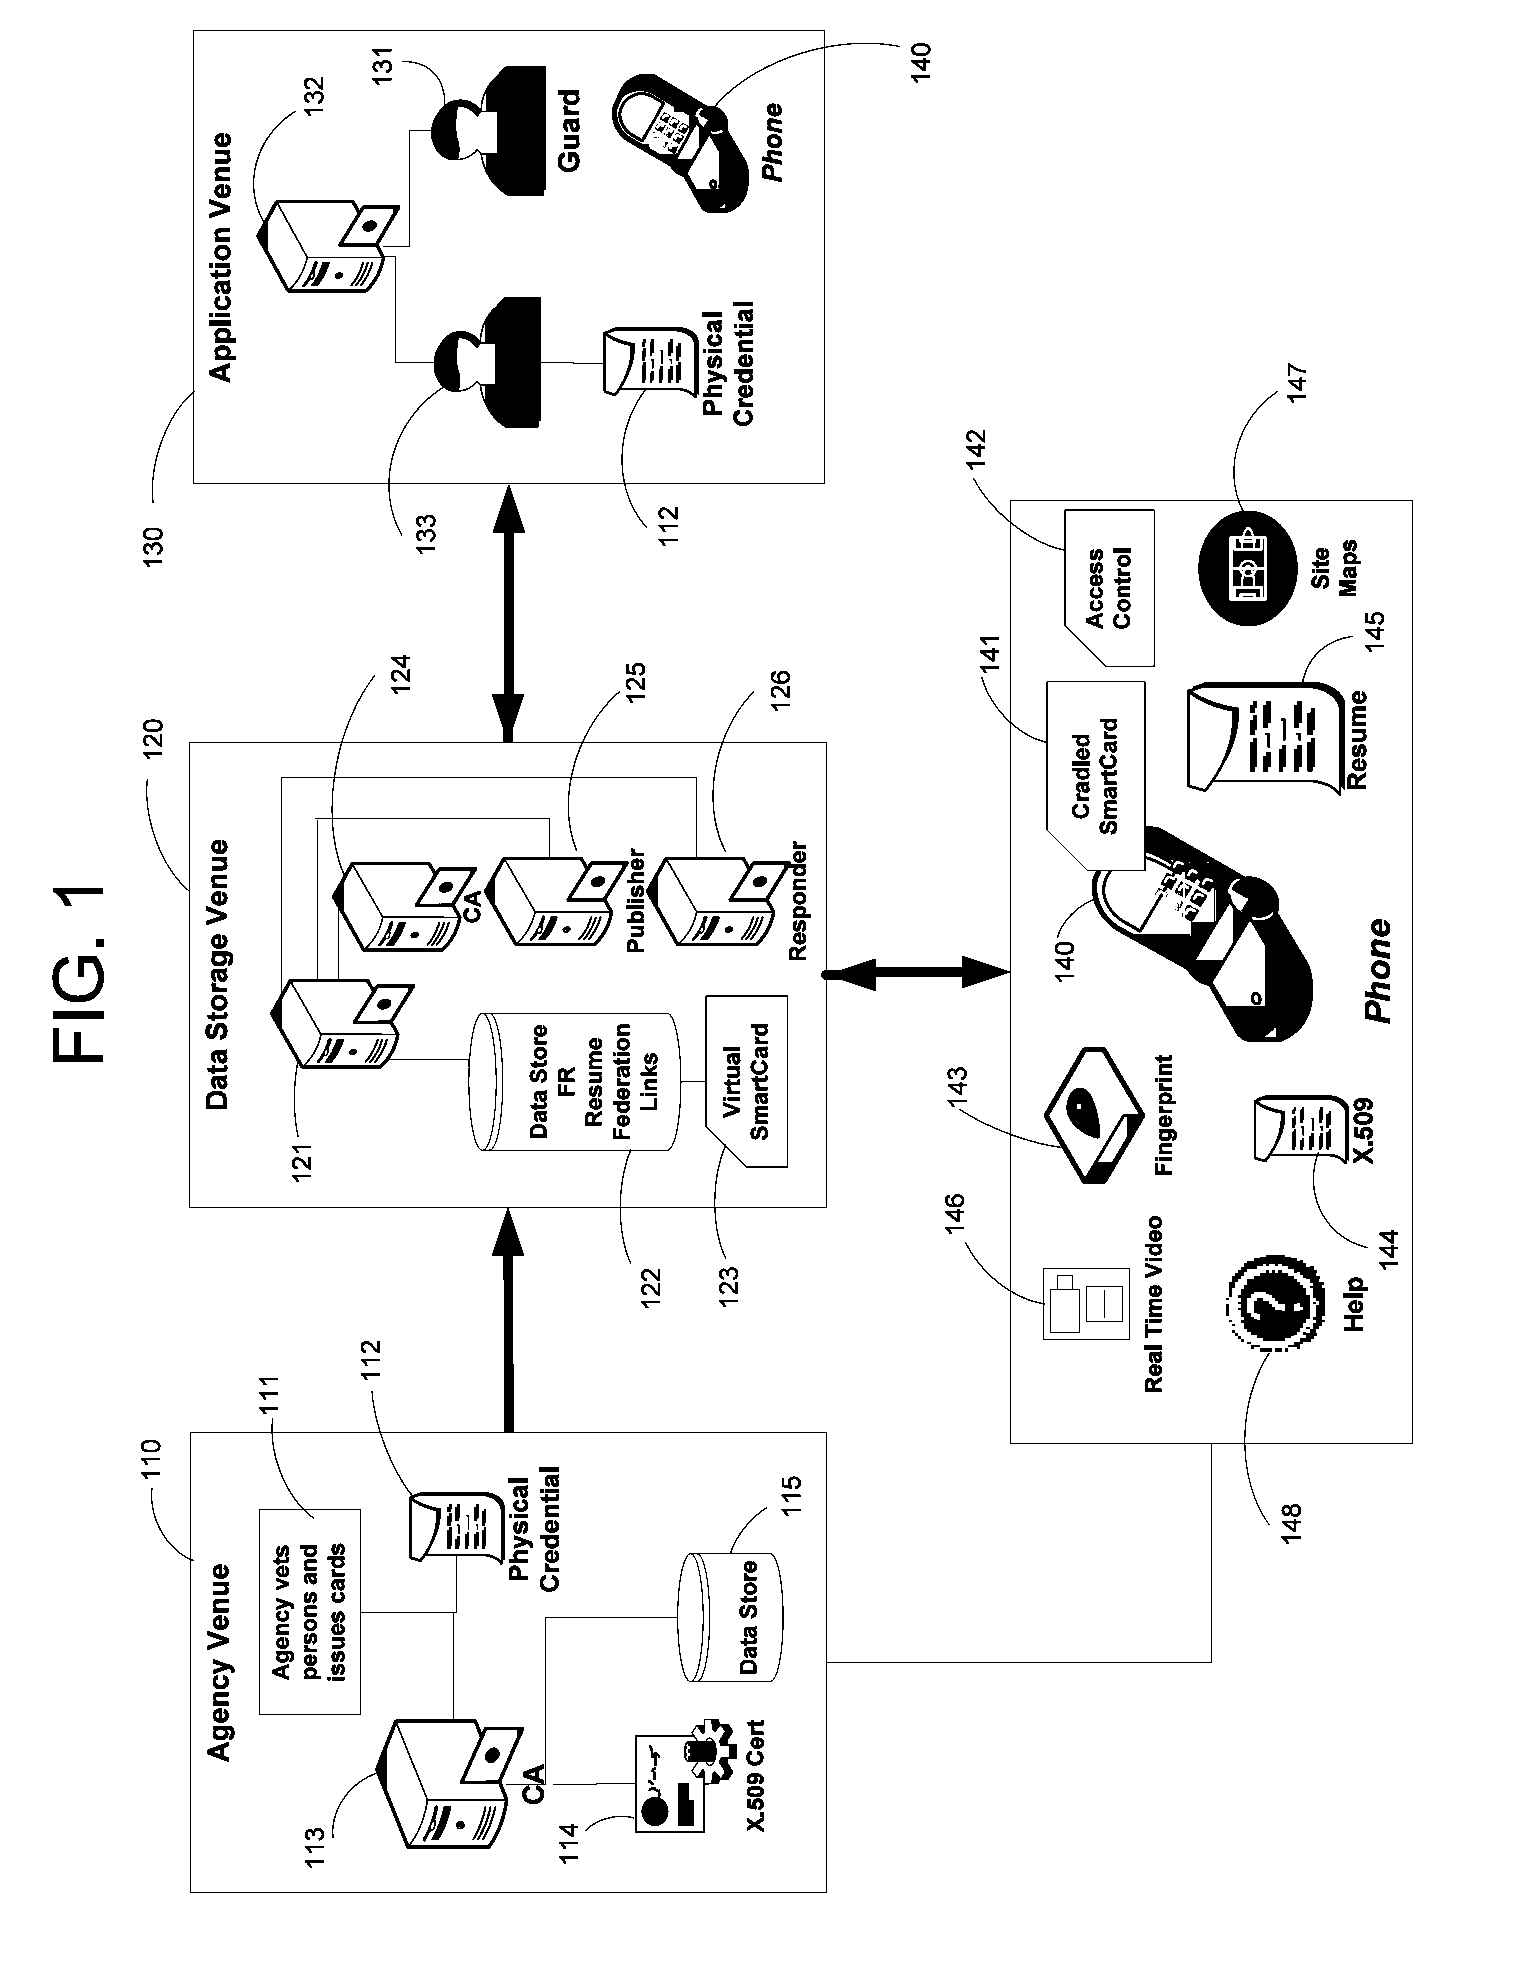 Apparatus and Methods for Providing Scalable, Dynamic, Individualized Credential Services Using Mobile Telephones